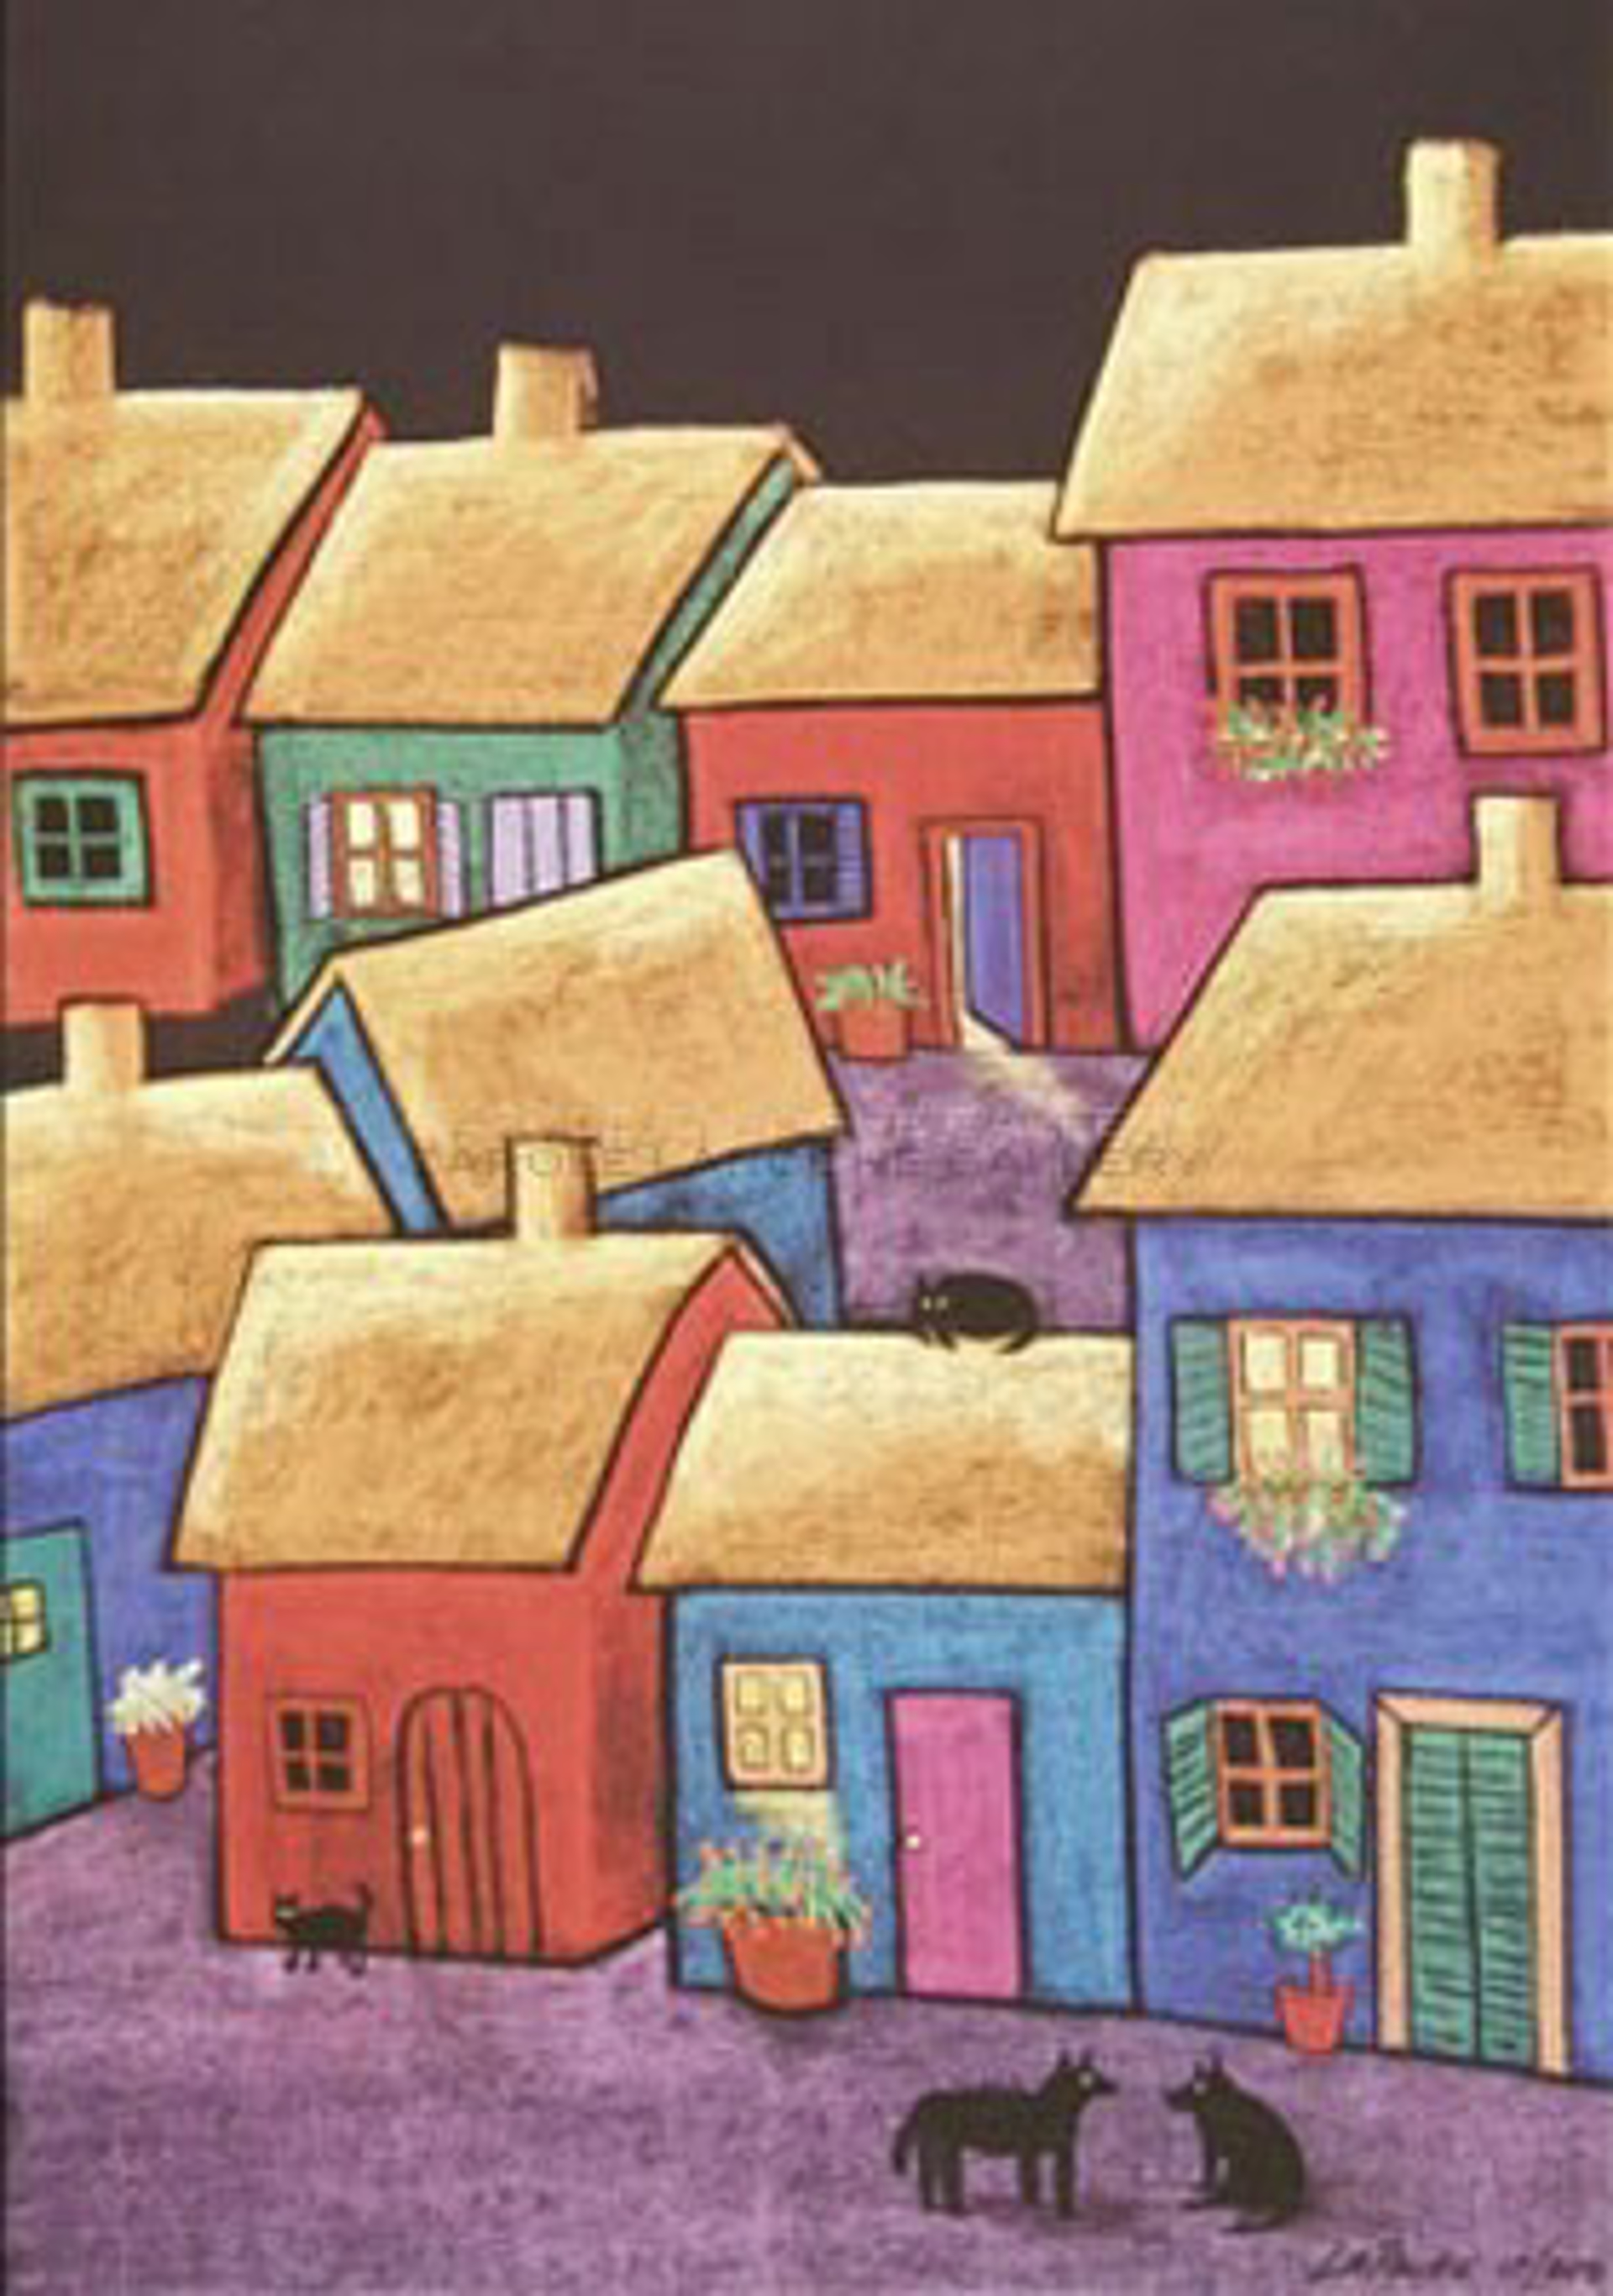 LITTLE VILLAGE - limited edition giclee on canvas or on paper w/frame size of: (large) 54"x40" $3700 or (medium) 38"x29" $2400 by Carole LaRoche